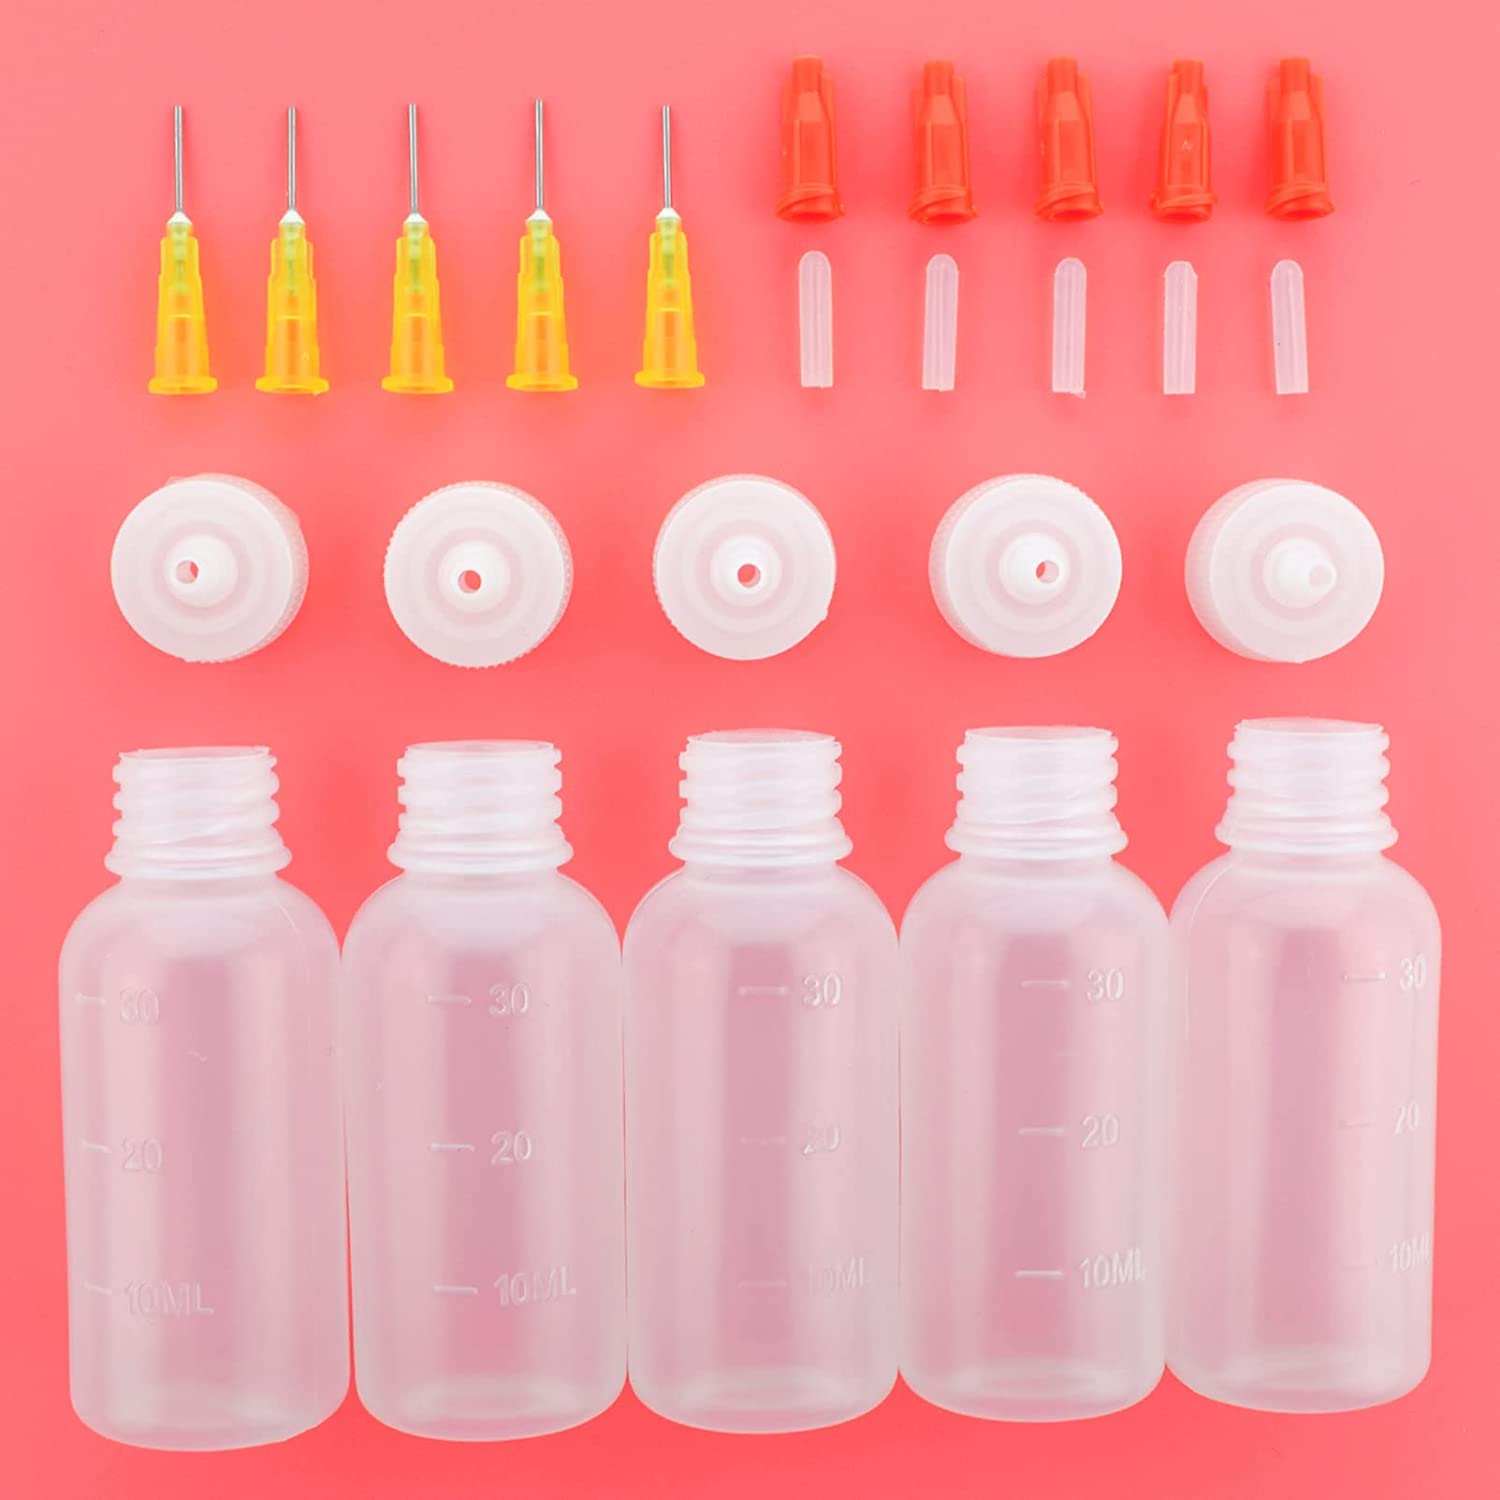 Free Hand Precision Tip Applicator Bottle 1 Oz. 4 Needle Tip Squeeze  Bottles and 12 Tips for Acrylic Painting, DIY Quilling and Paper Craft